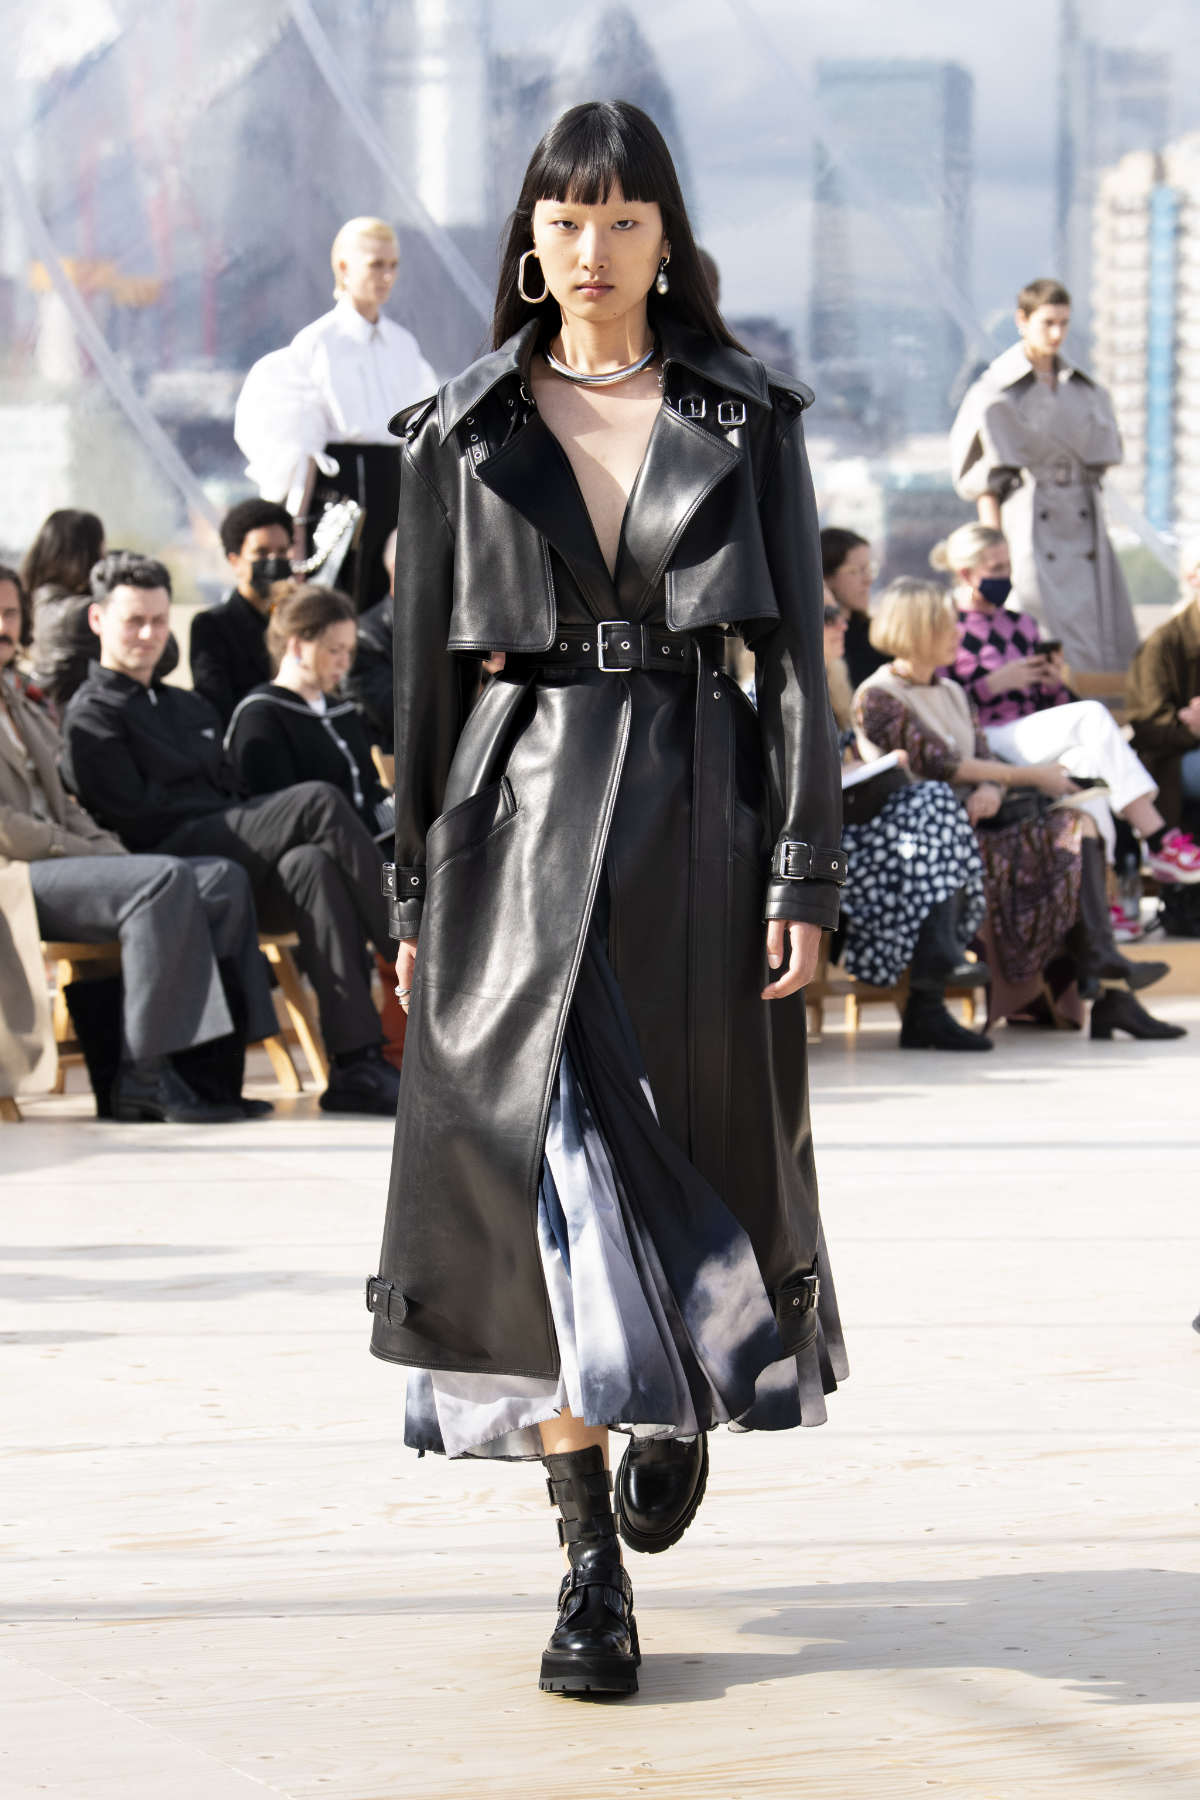 Alexander McQueen Presents Its New Spring/Summer 2022 Womenswear Collection: London Skies